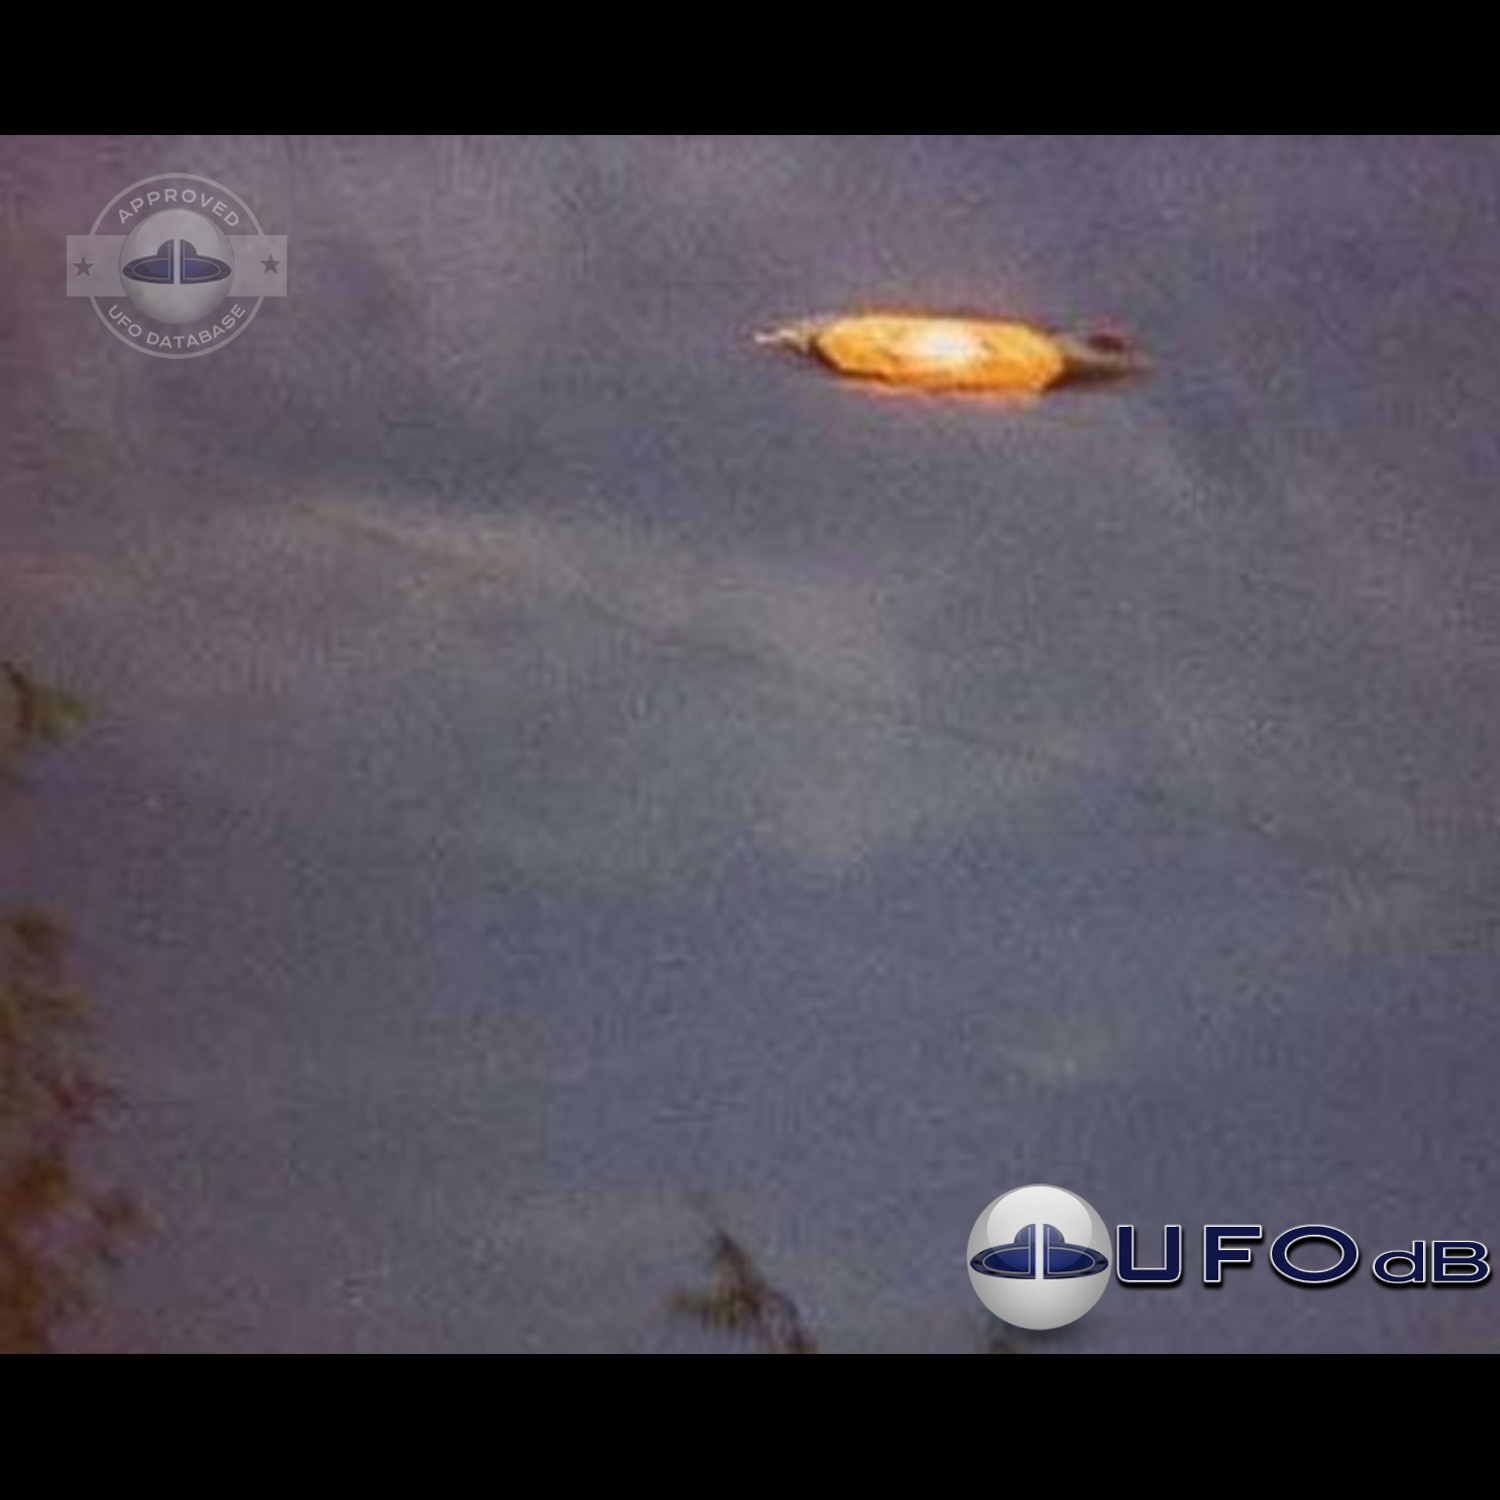 UFO picture - We can see at the center of the UFO an orange light UFO Picture #130-1